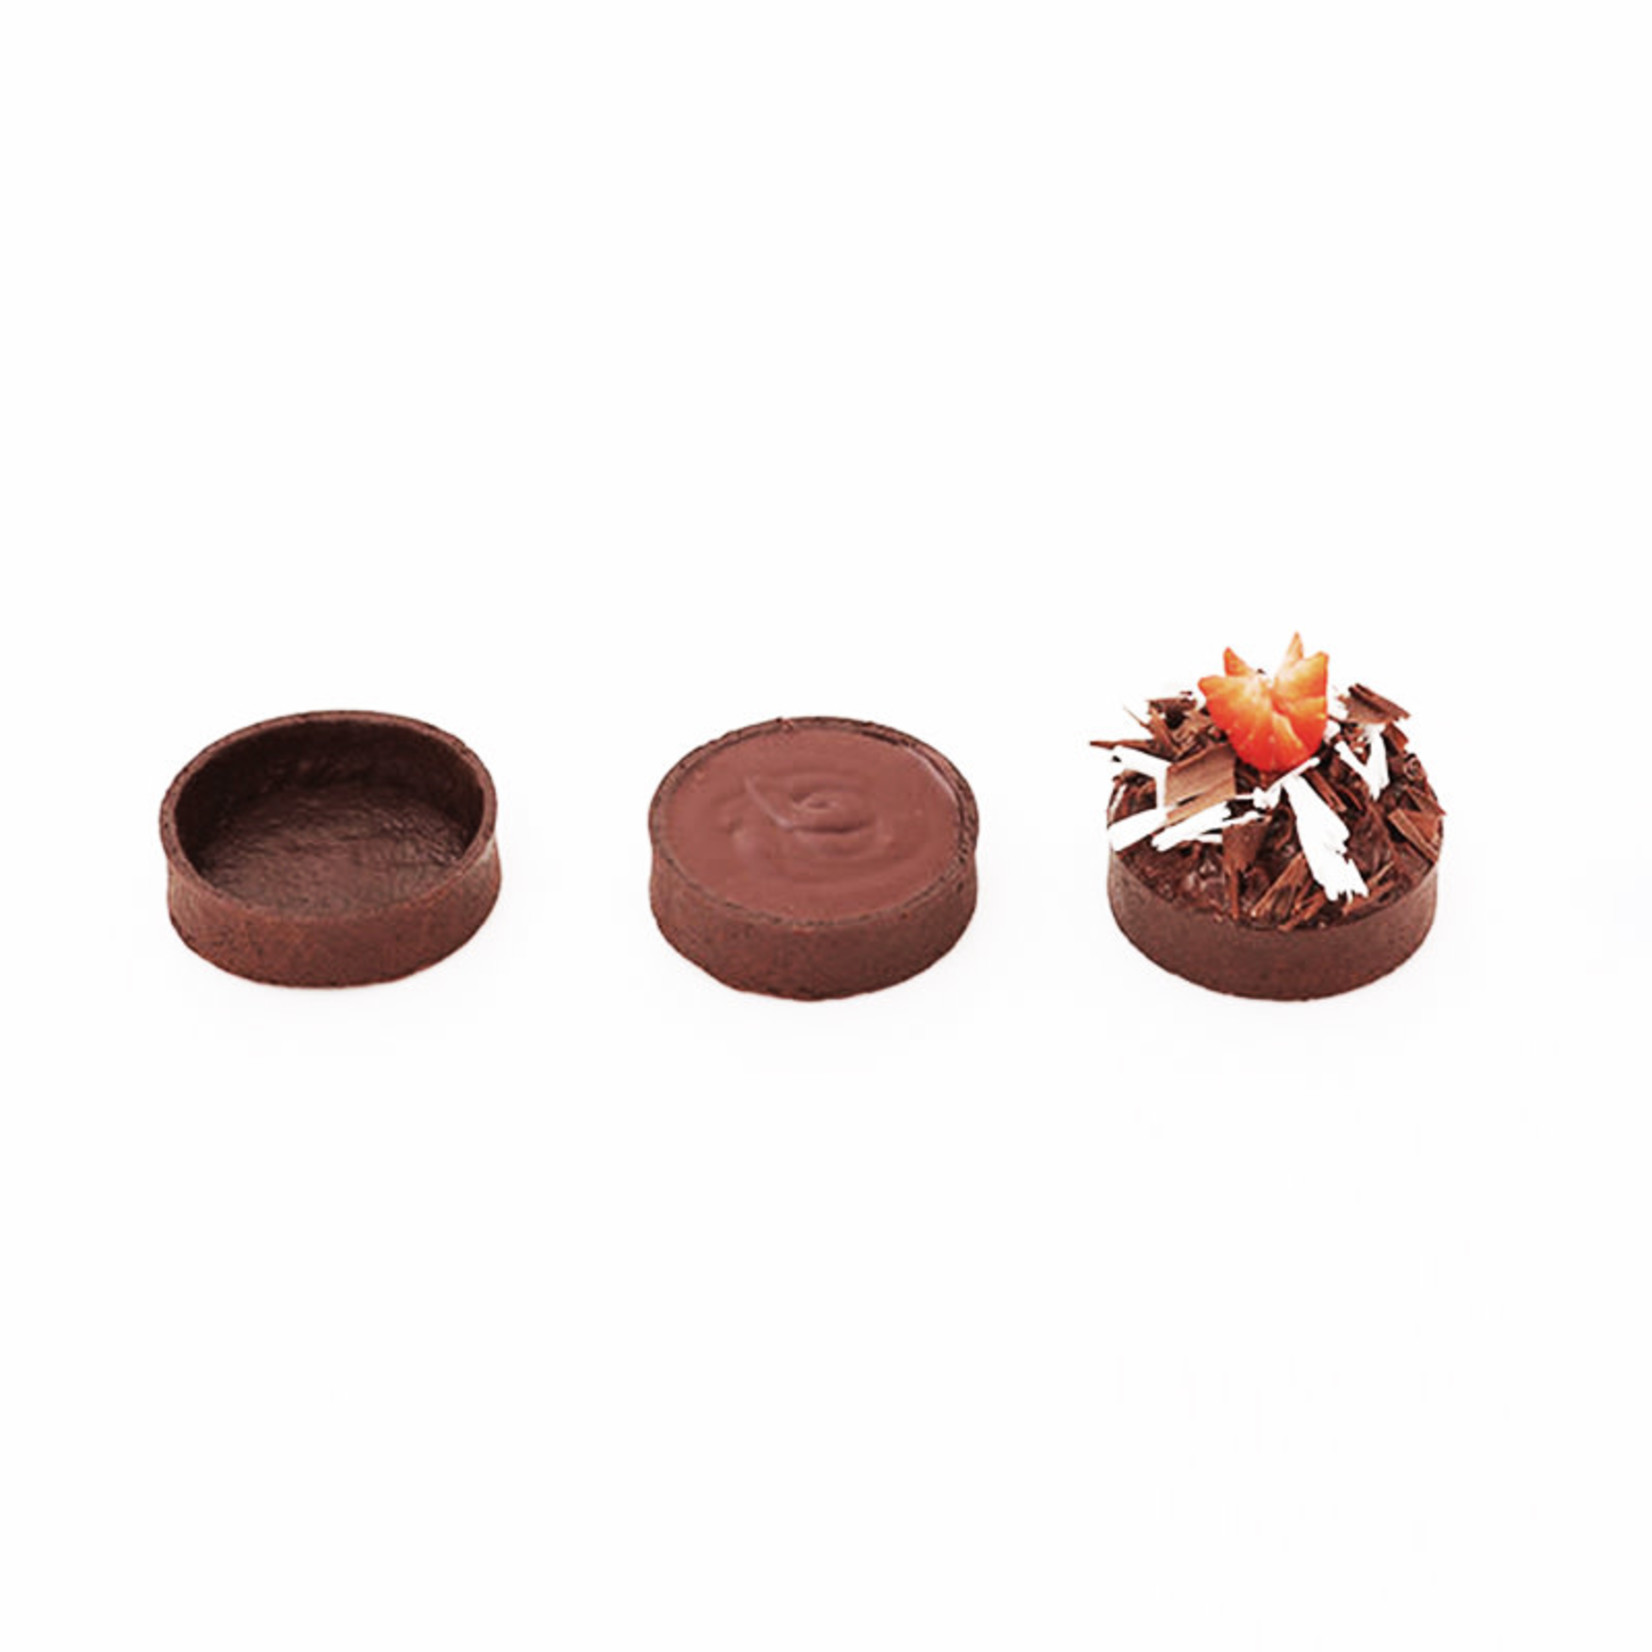 Le Chic Patissier Le Chic Patissier - Chocolate Round Tart shell - 2" (20 ct) sleeve